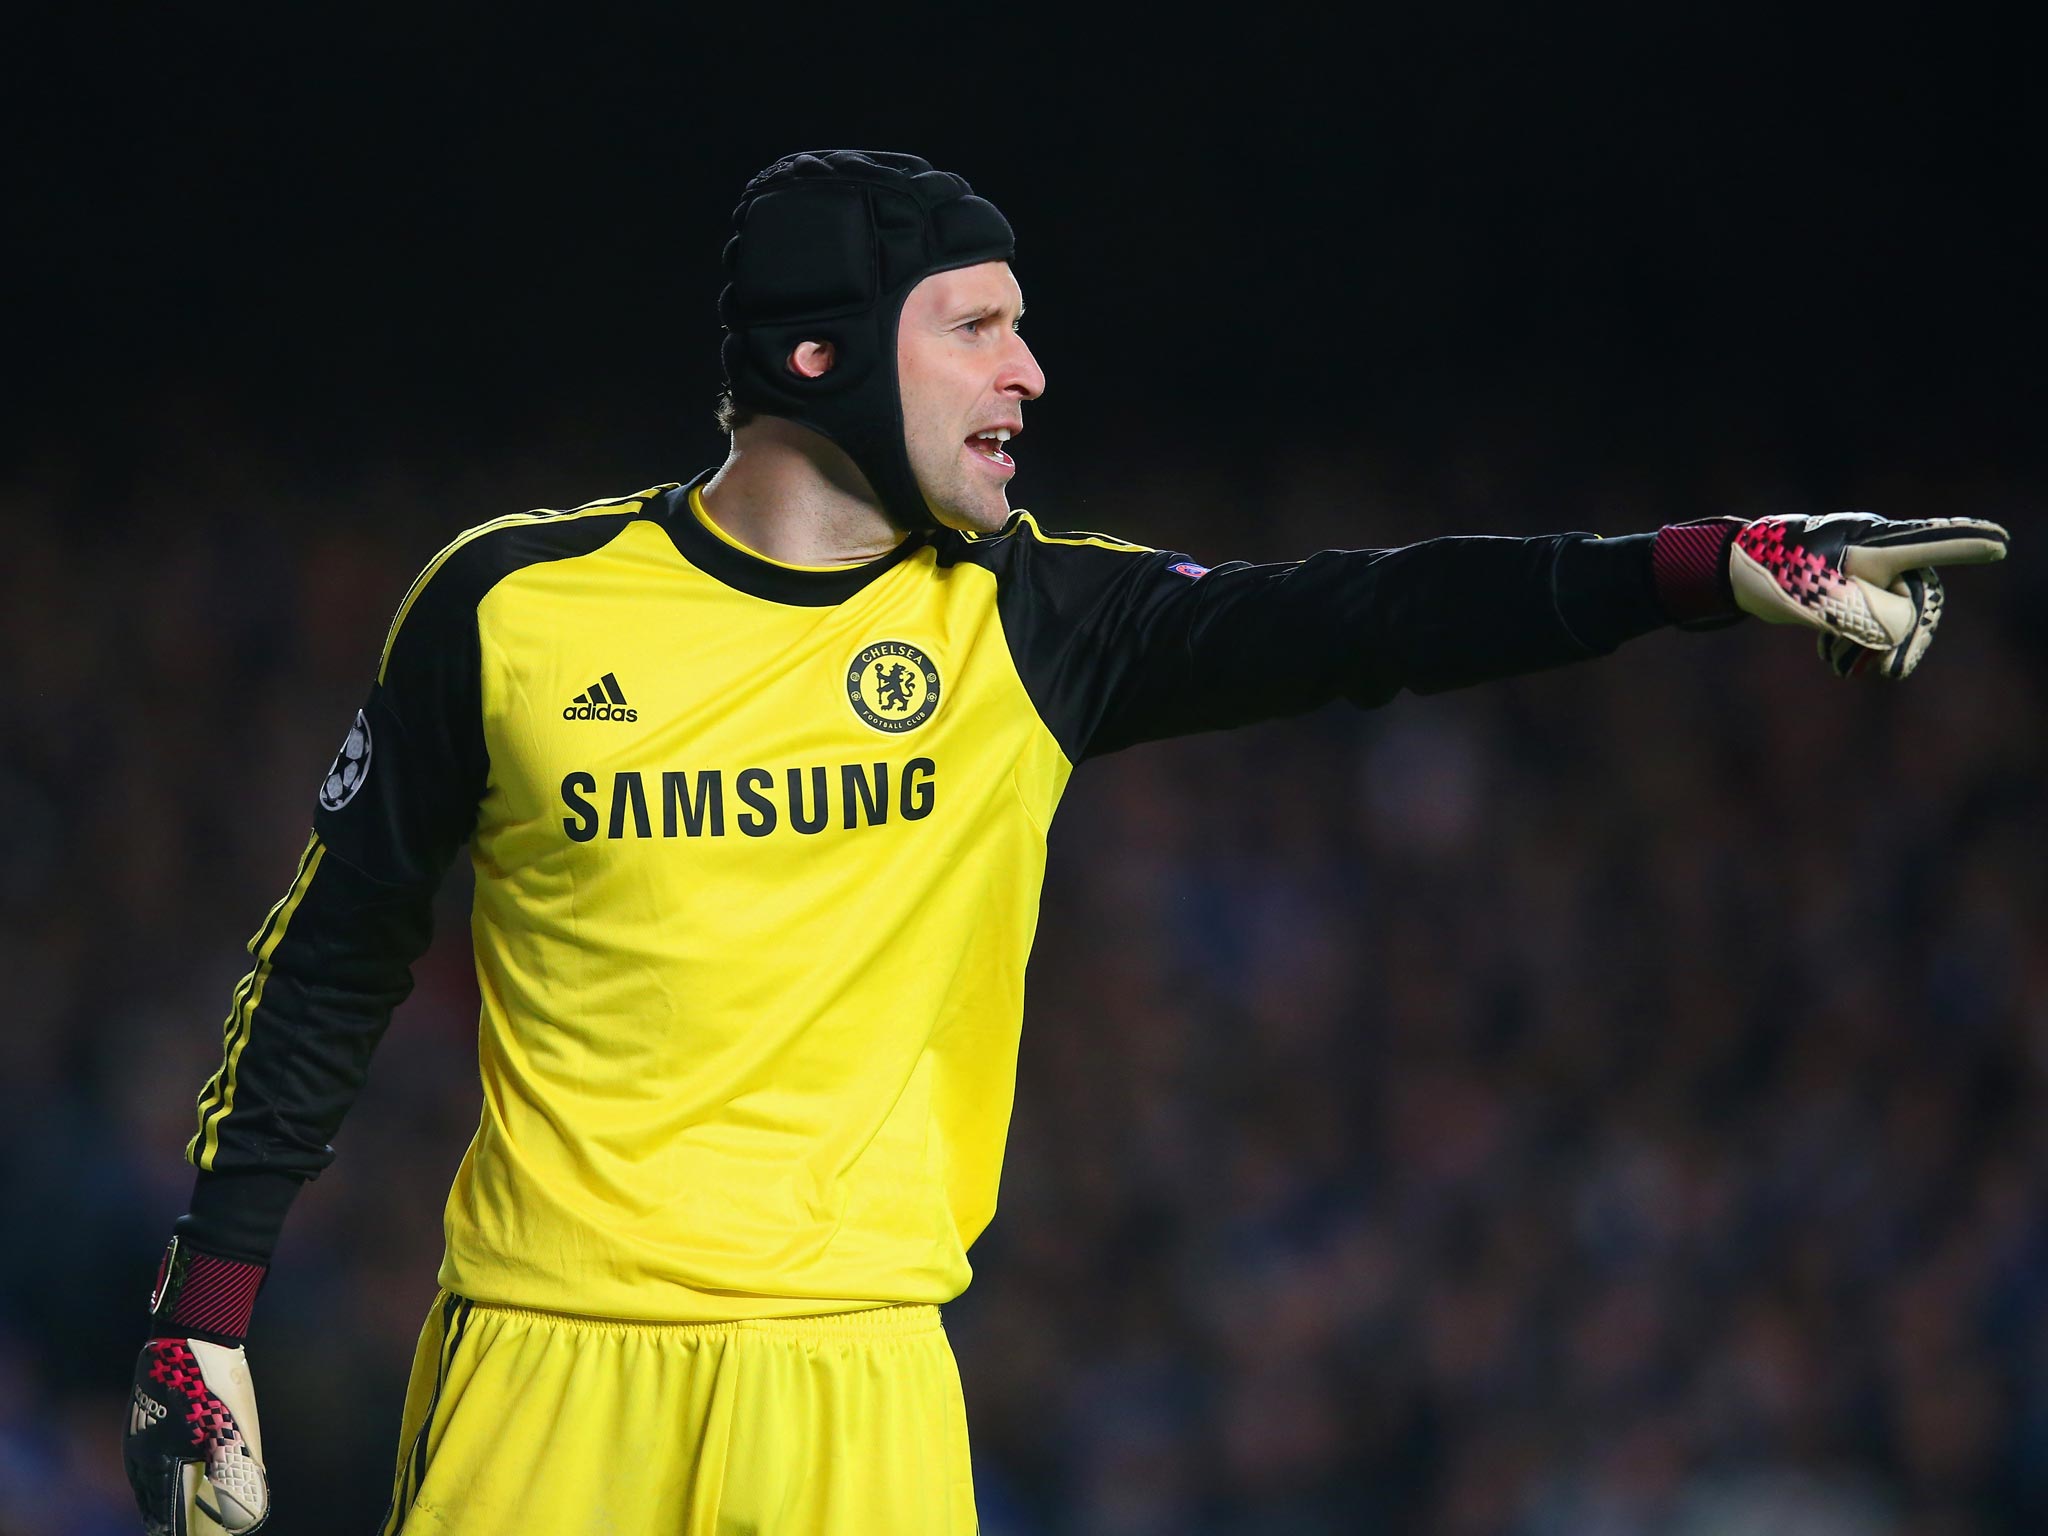 Petr Cech is keen to see how Liverpool deal with the pressure of a Premier League title challenge